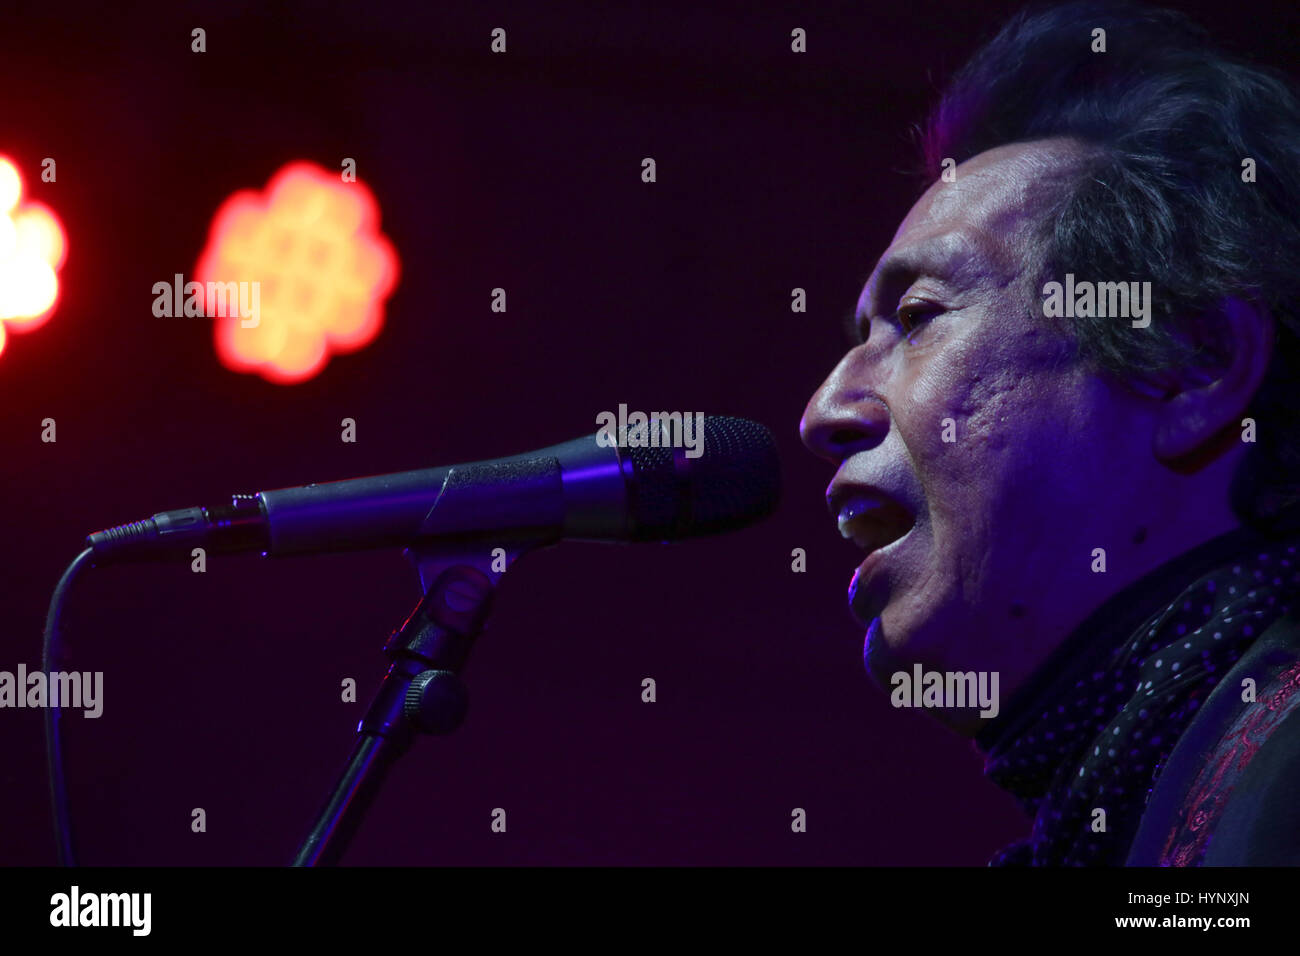 London, UK. 5th April, 2017. Alejandro Escovedo performing live on stage at Bush Hall in London. Photo date: Wednesday, April 5, 2017. Credit: Roger Garfield/Alamy Live News Stock Photo